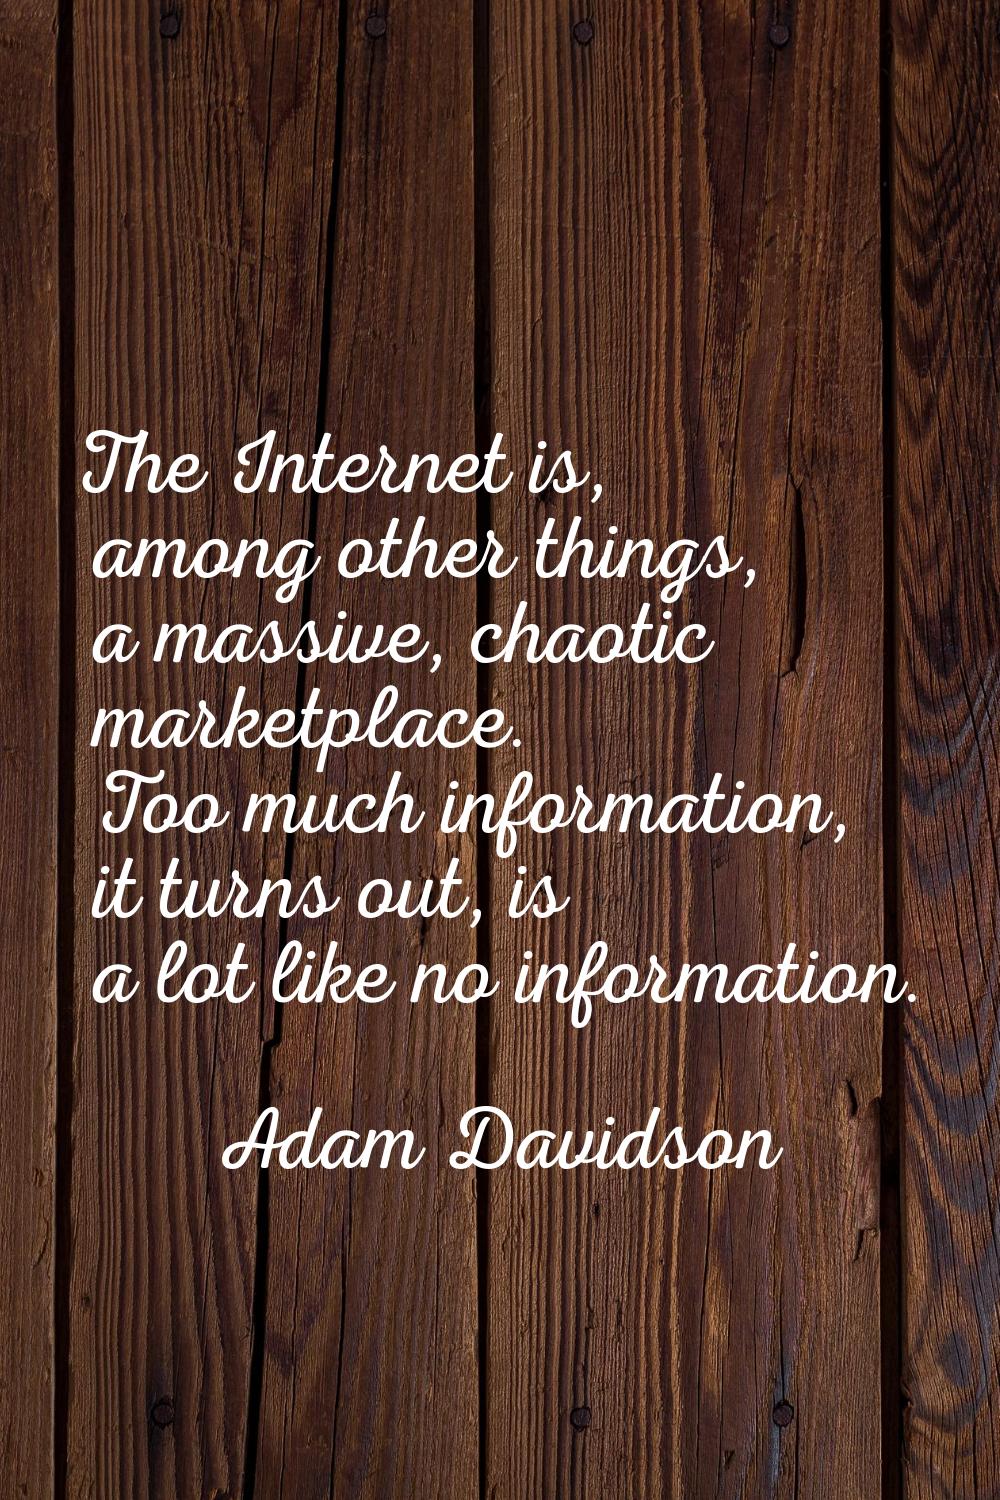 The Internet is, among other things, a massive, chaotic marketplace. Too much information, it turns